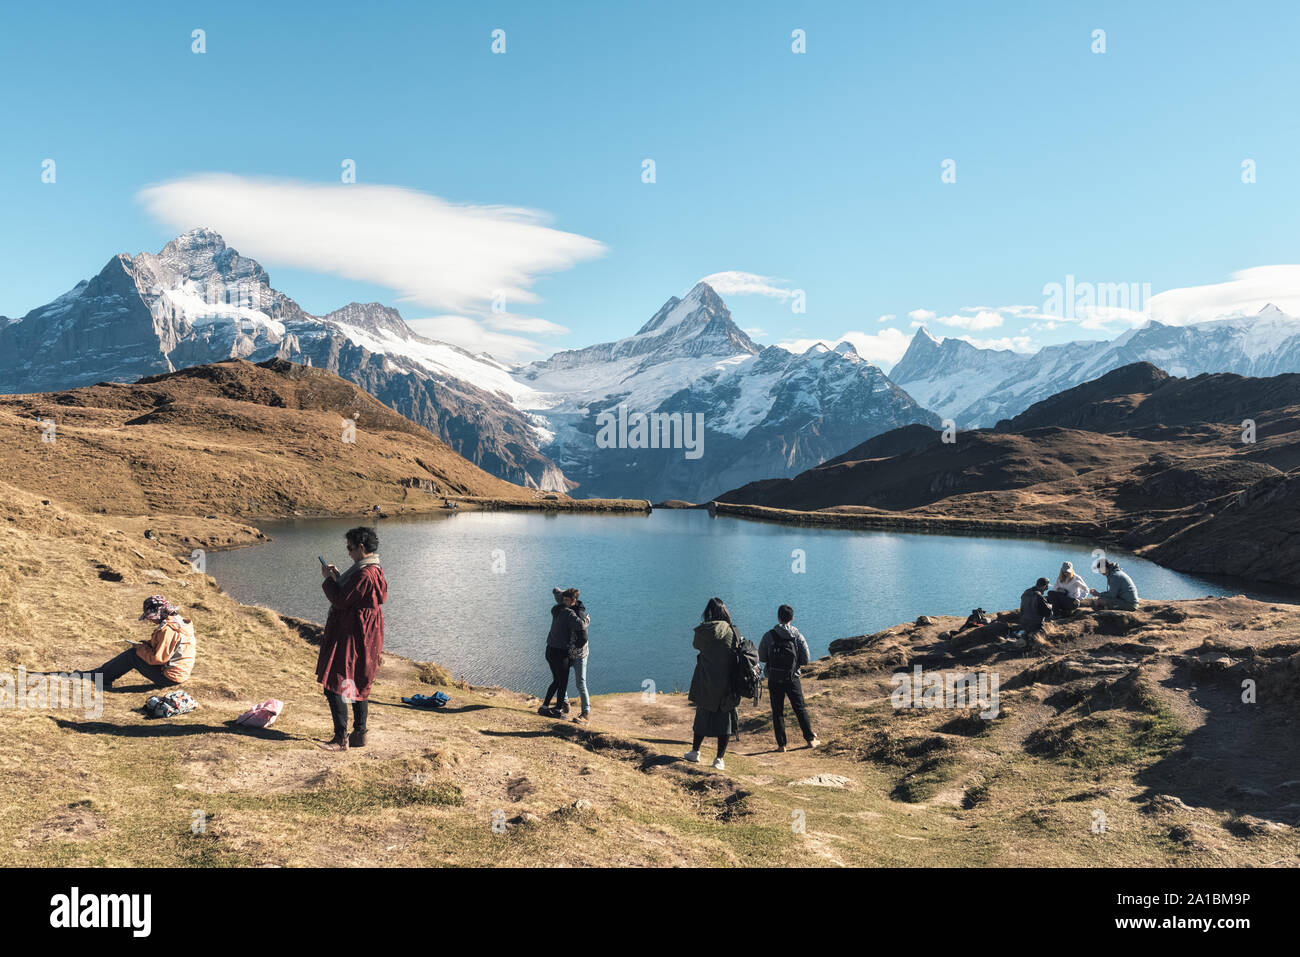 Bachalpsee lake, Switzerland - November 21, 2018: famous tourists attraction in Swiss Alps mountains Stock Photo